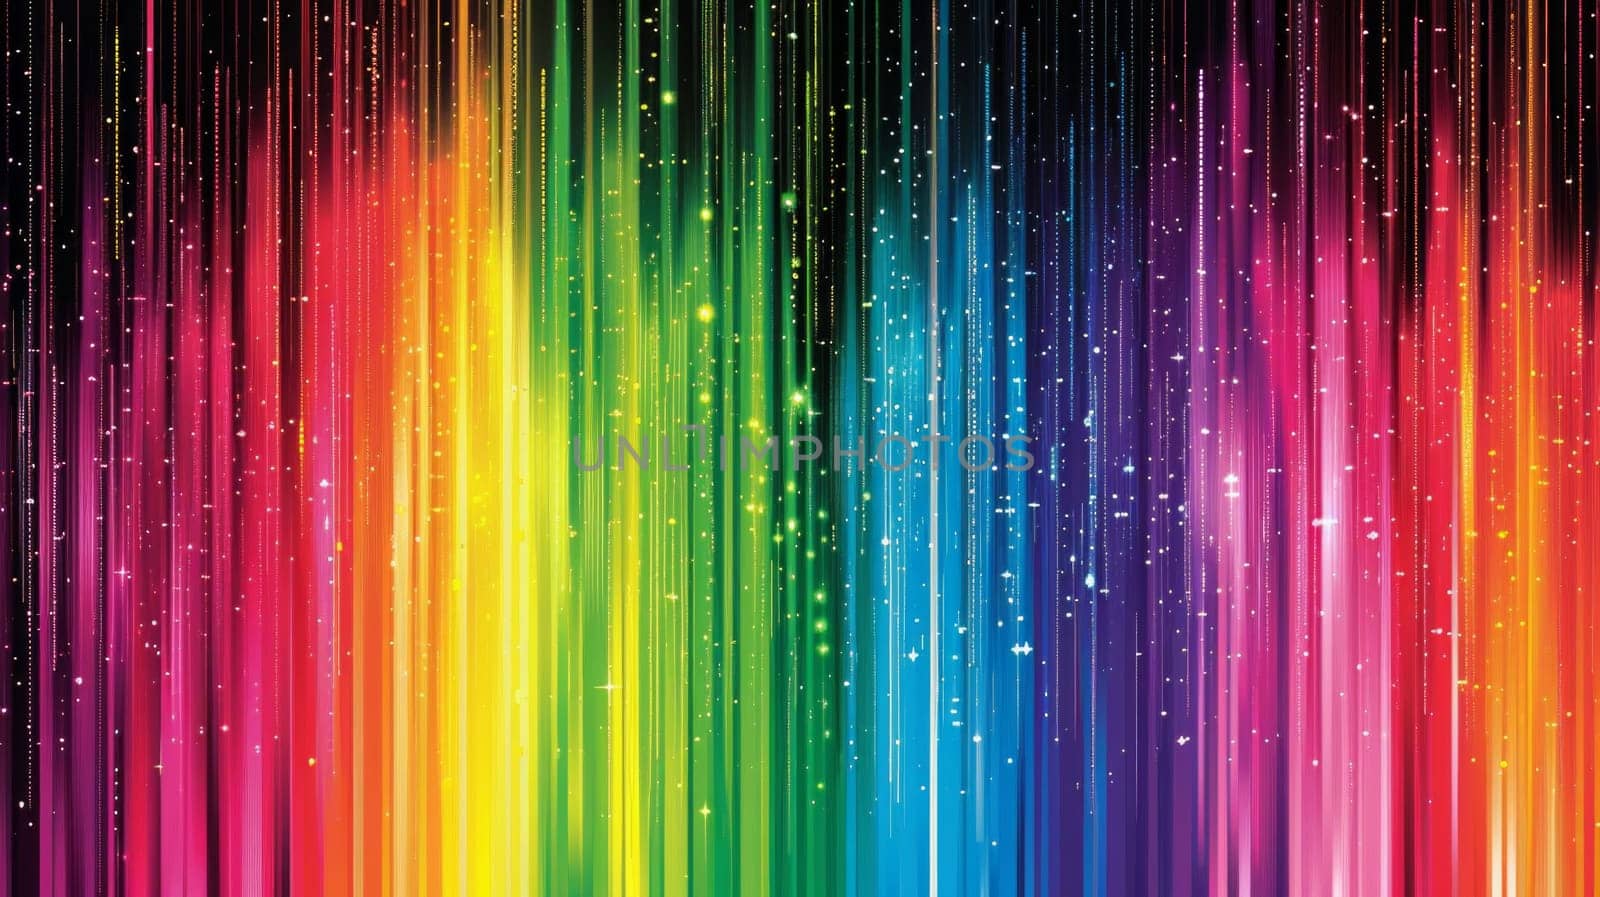 Abstract colorful gradient stripe background.